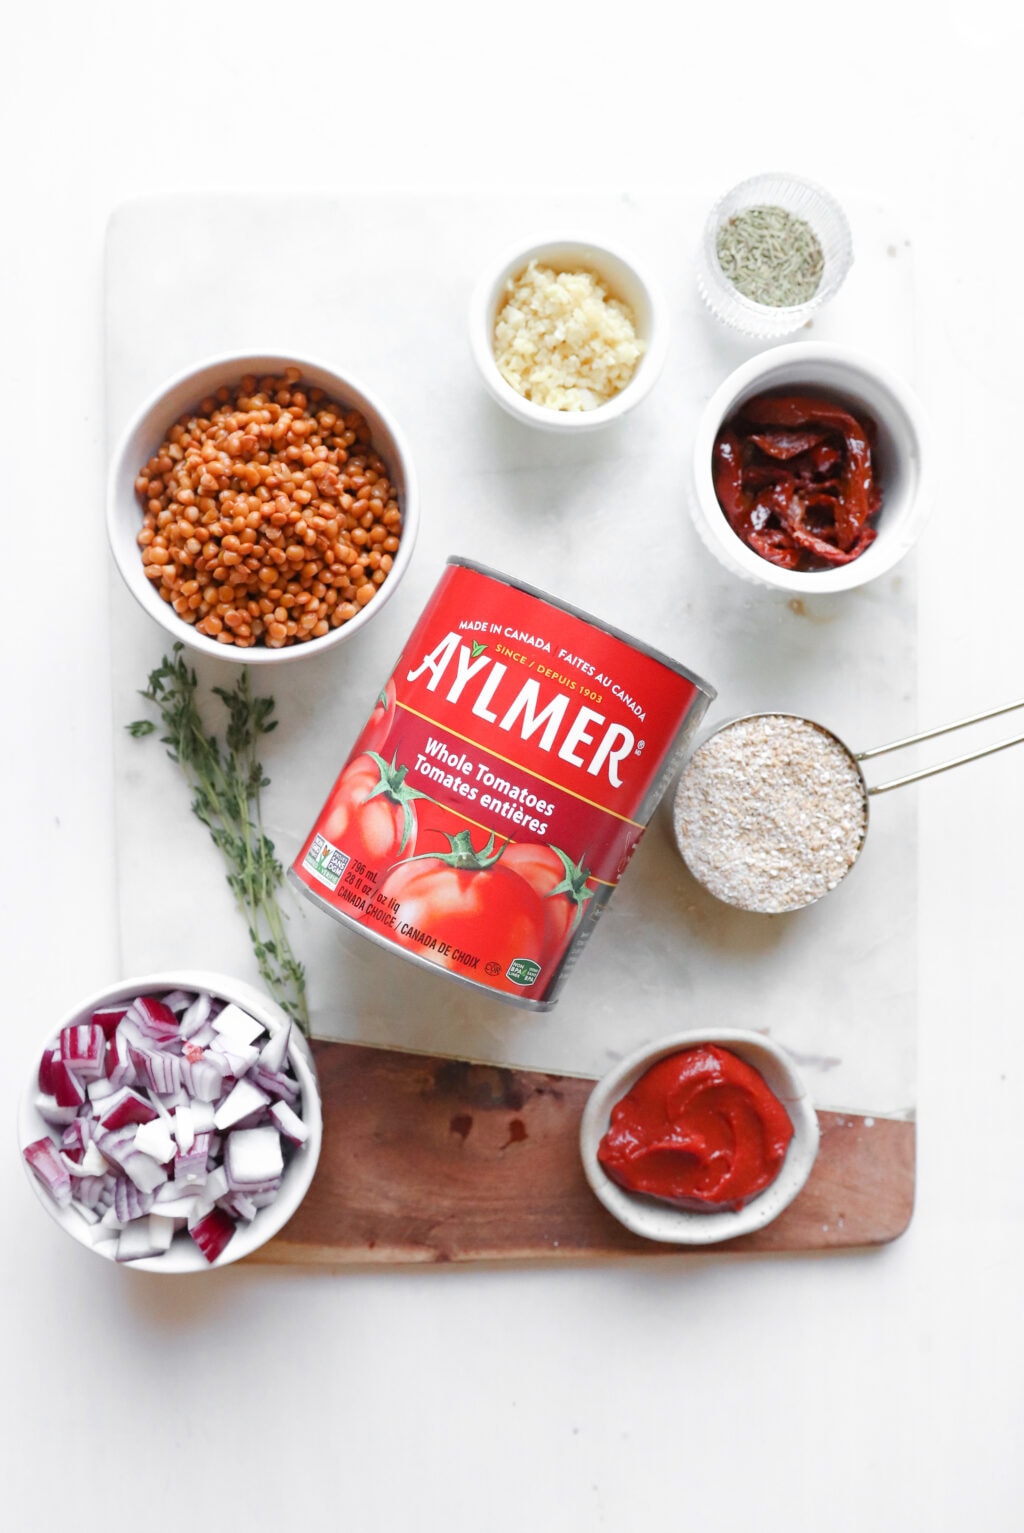 Ingredients of roasted tomato lentil soup are laid out in bowls. Moving left to right are red lentils, garlic, sundried tomatoes, steel cut oats, red onion, thyme, canned tomatoes, steel-cut oats, and tomato paste